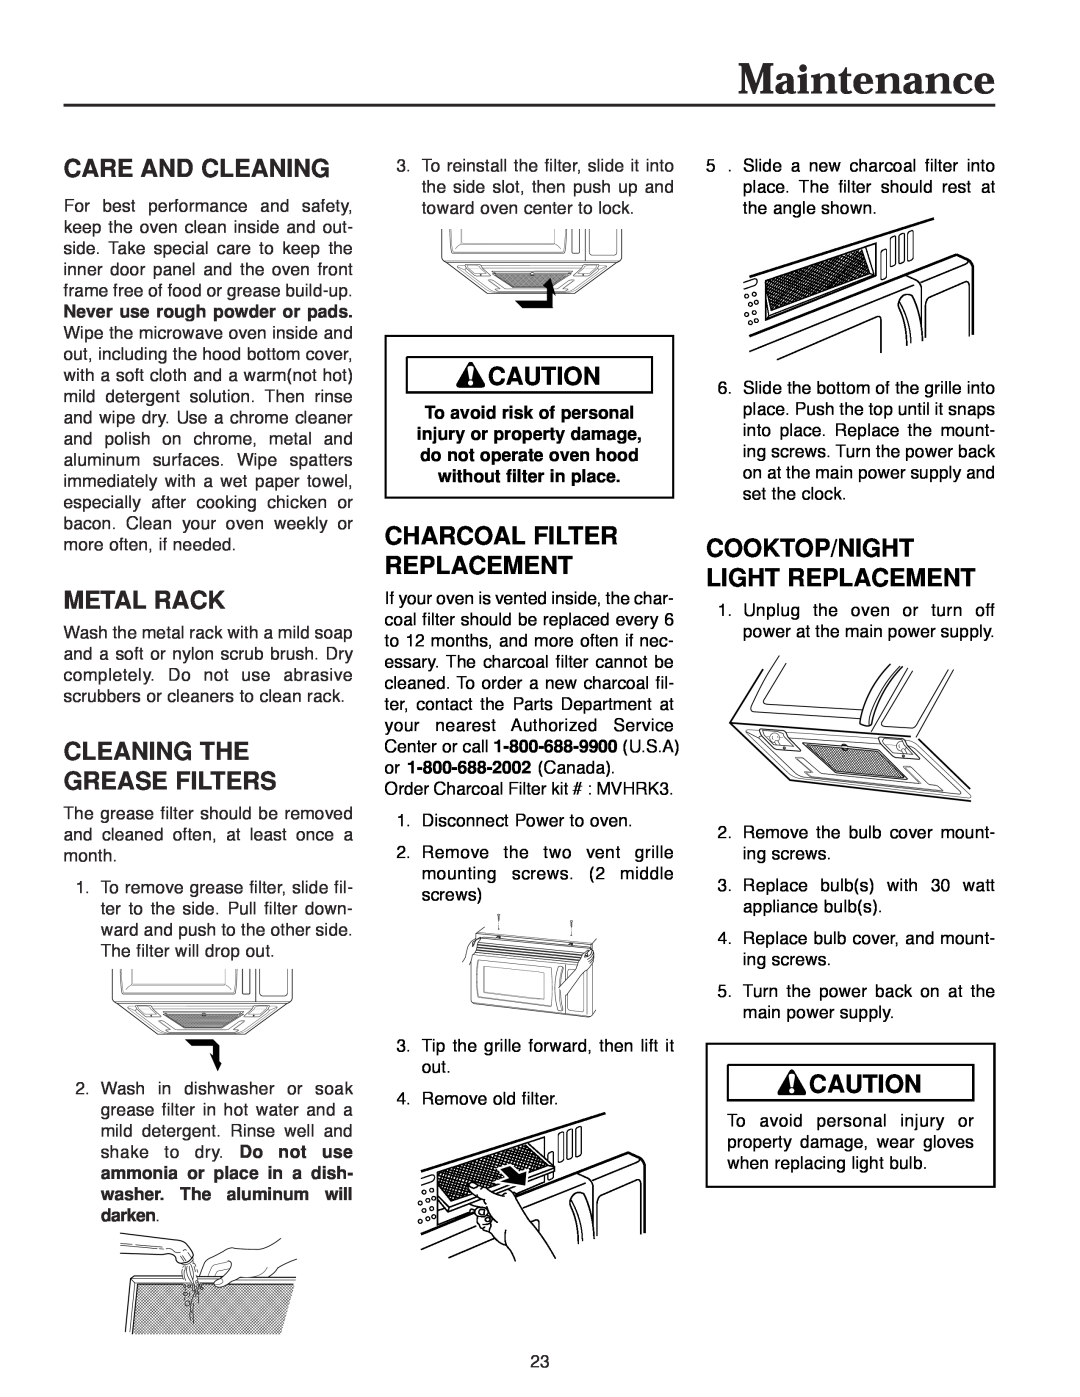 Maytag MMV4184AA owner manual Care And Cleaning, Metal Rack, Cleaning The Grease Filters, Charcoal Filter Replacement 